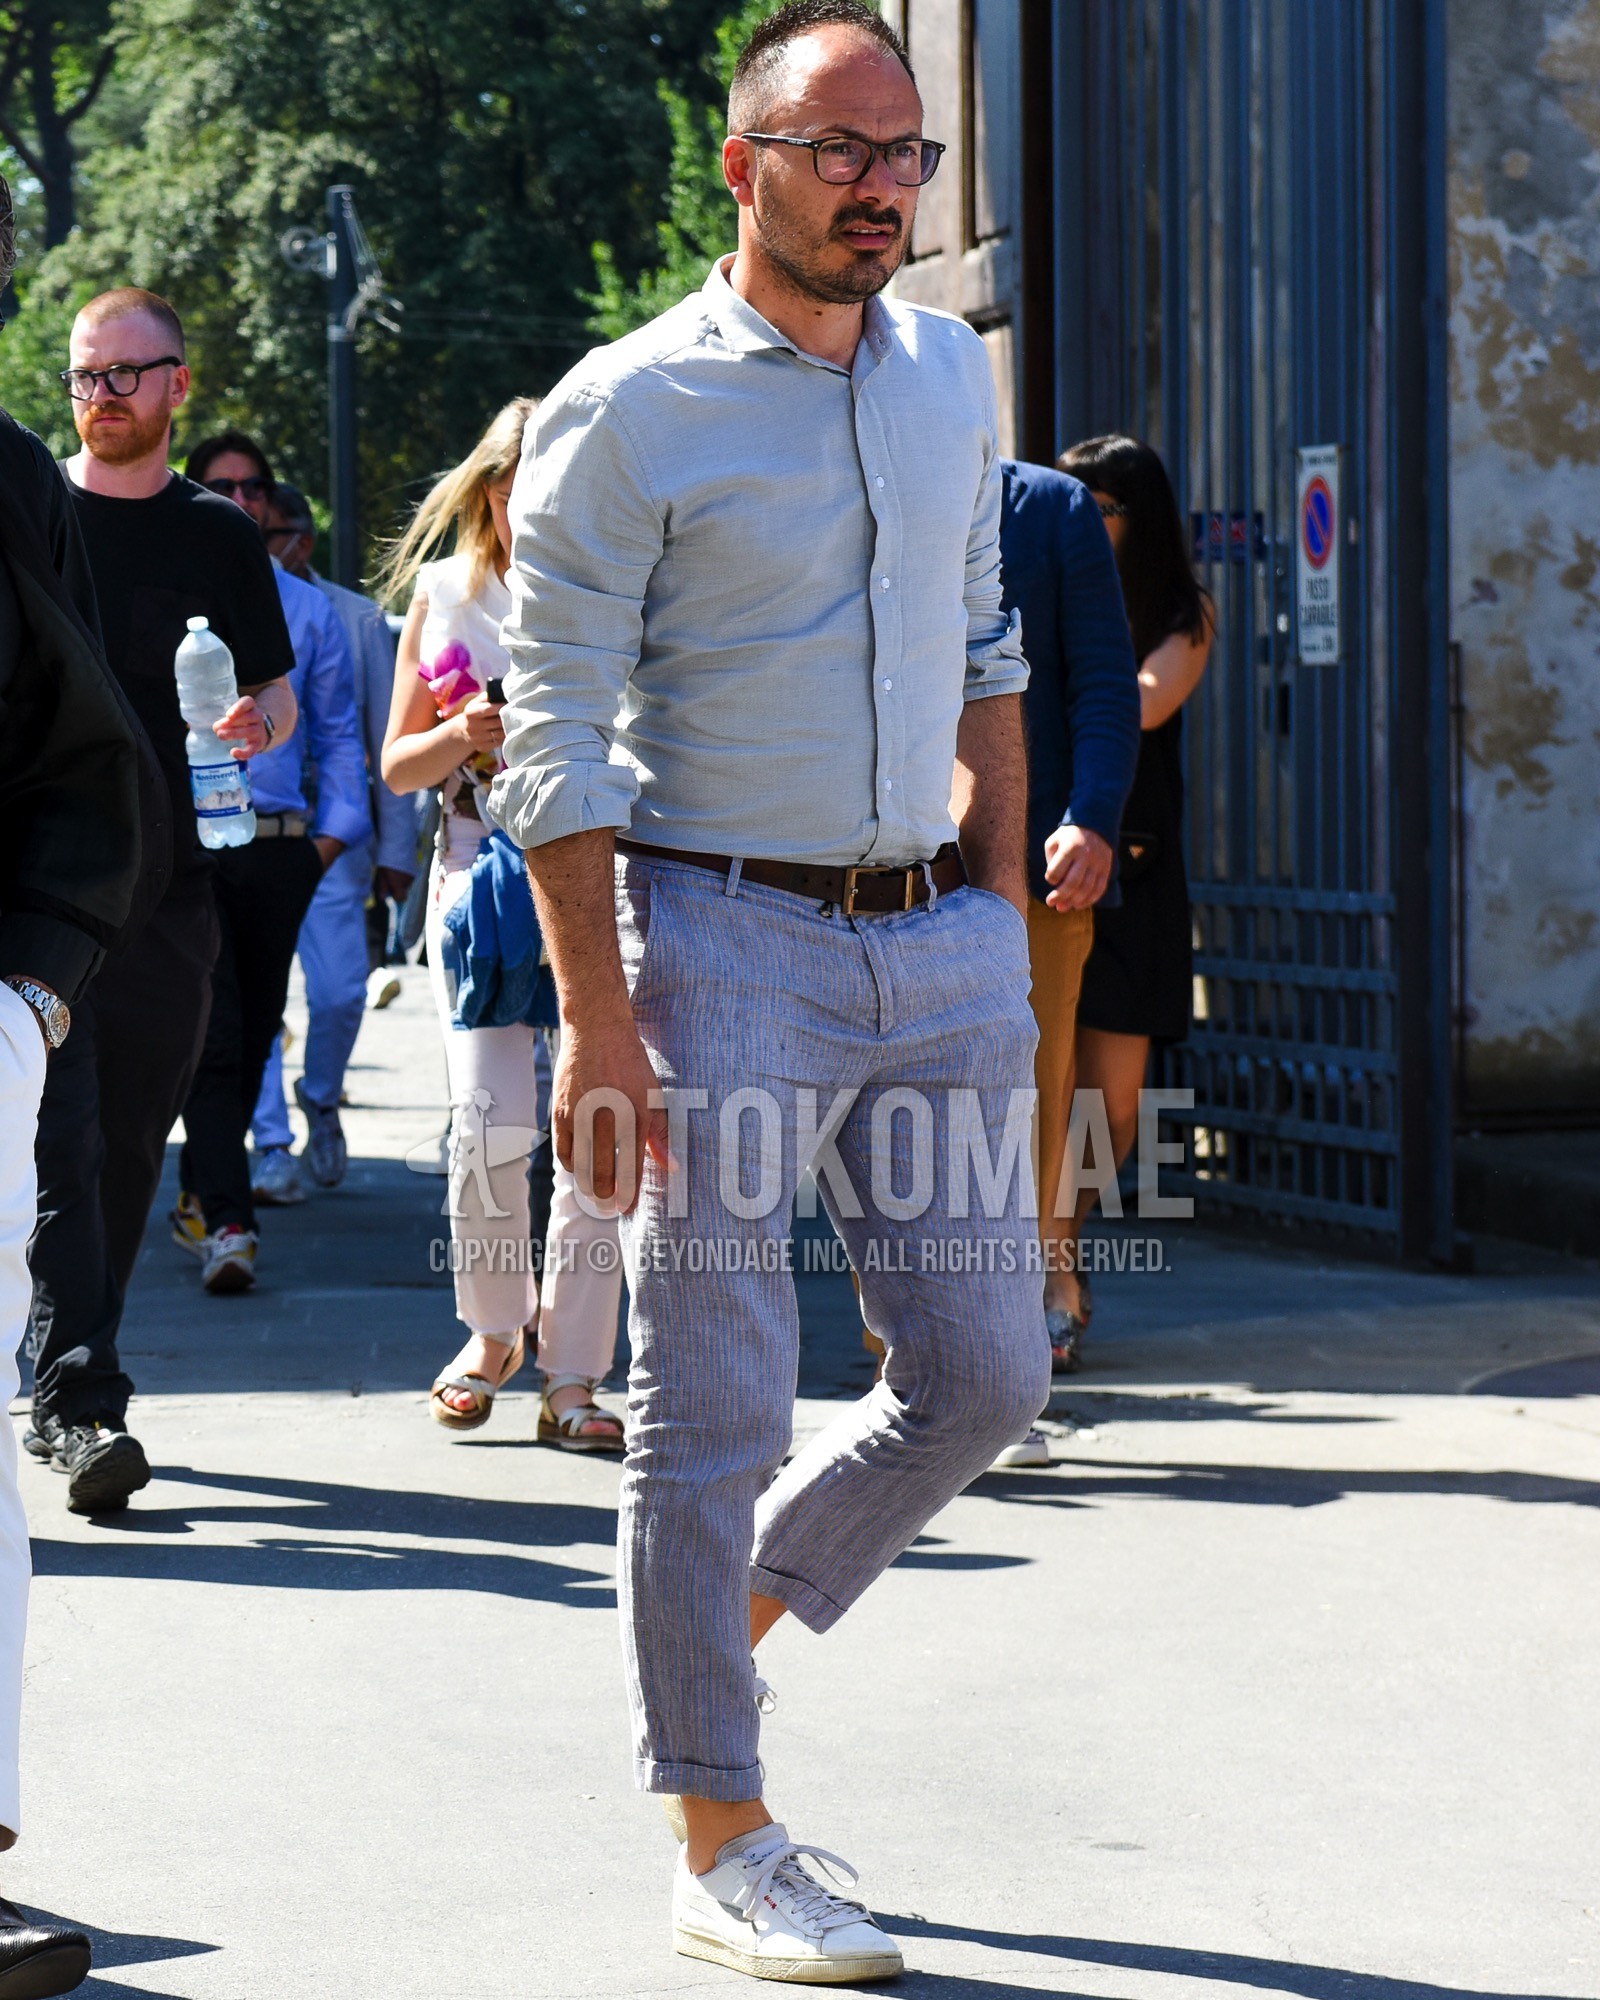 Men's spring summer outfit with brown tortoiseshell glasses, gray plain shirt, brown plain leather belt, blue stripes chinos, white low-cut sneakers.